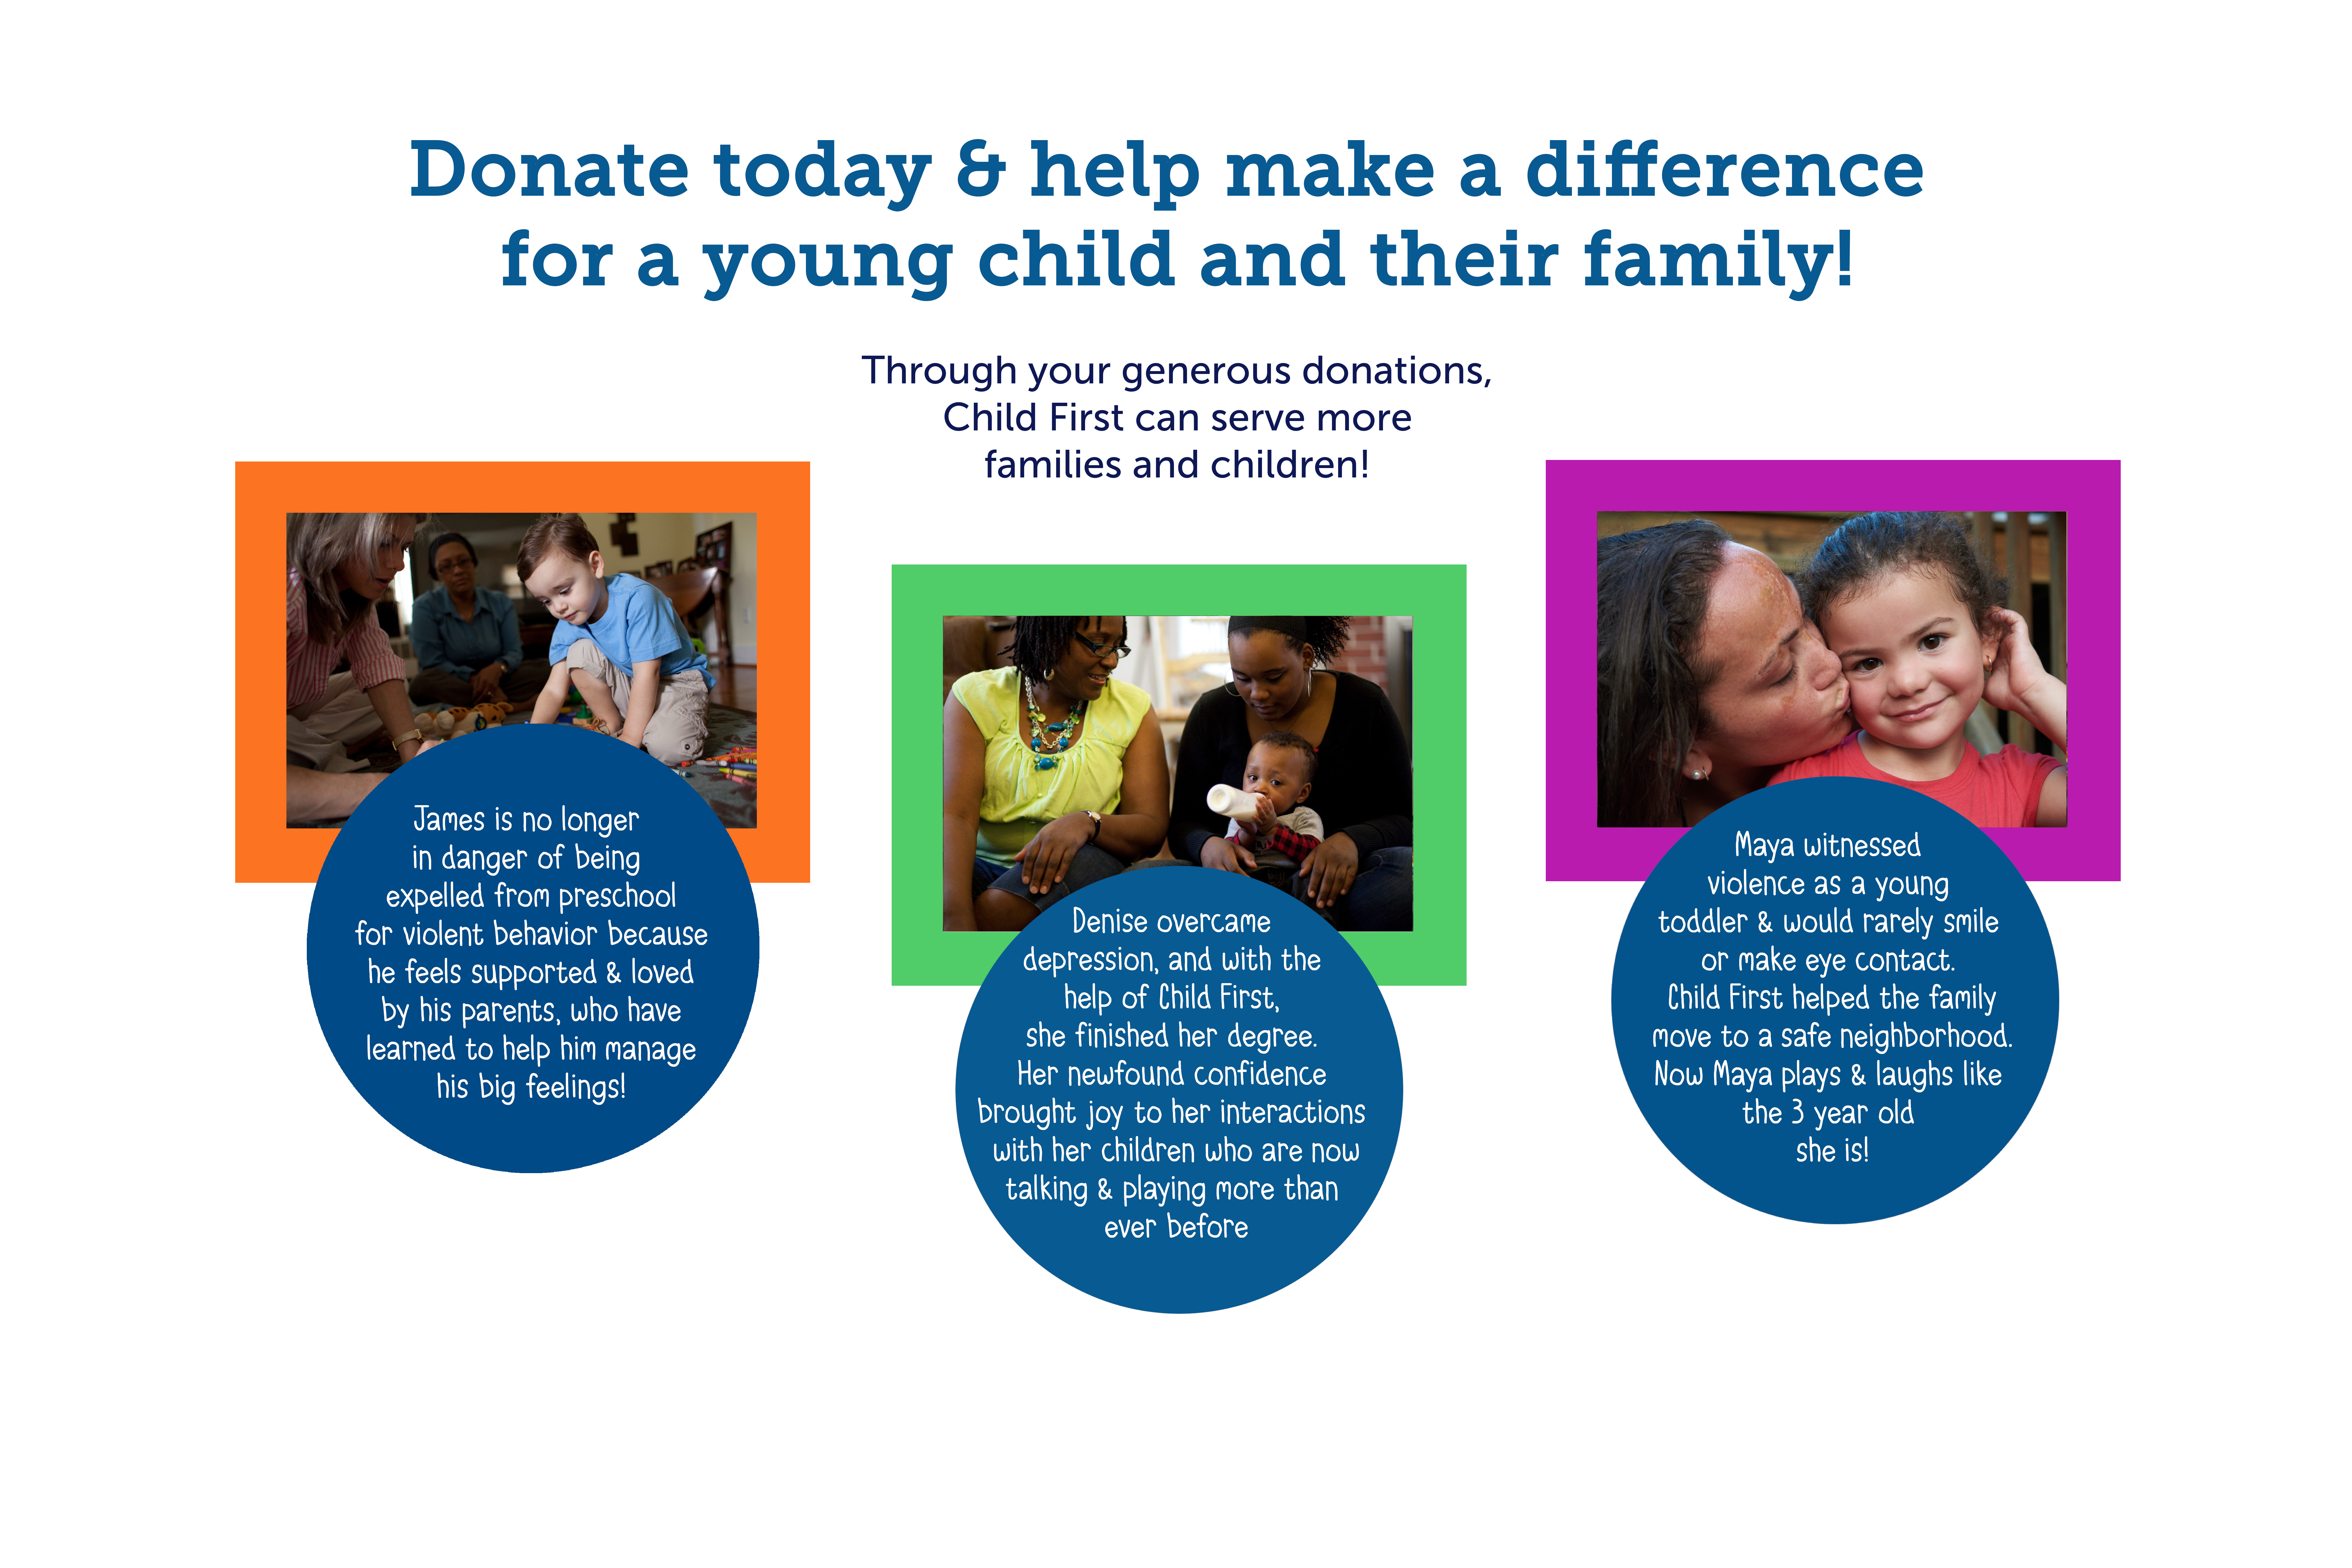 Donations to Child First help heal families from the effects of toxic stress!